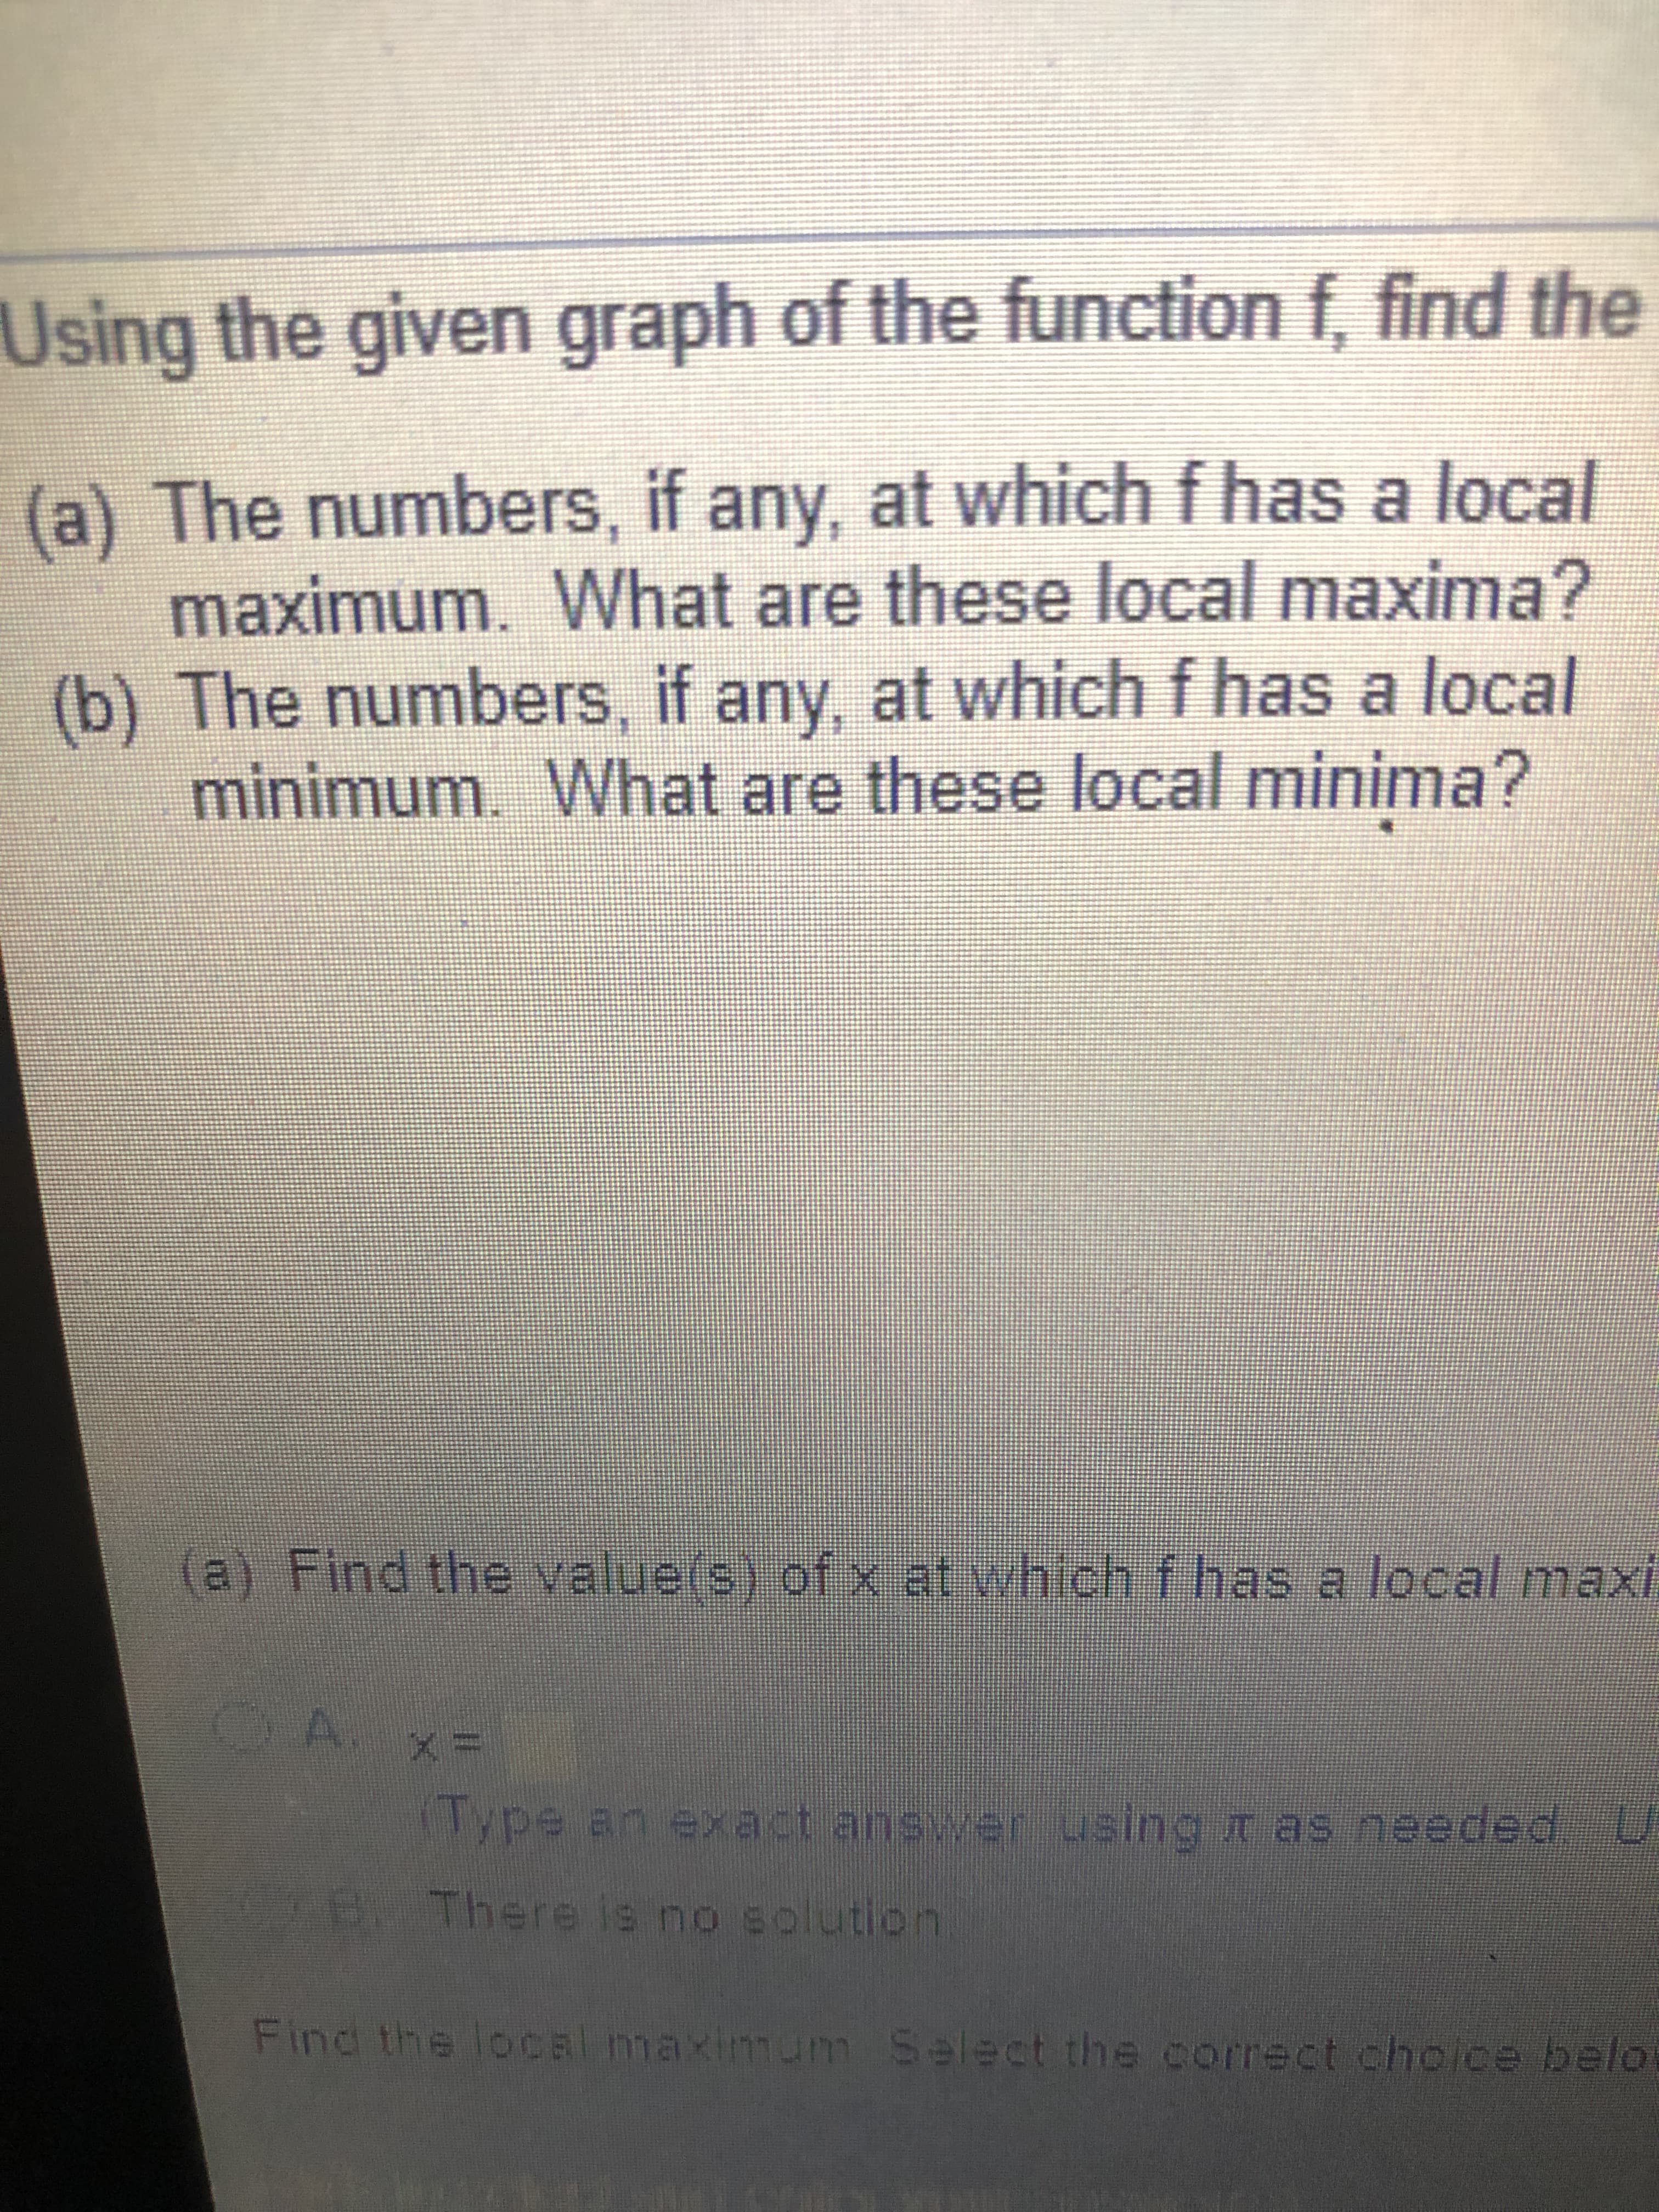 (a) The numbers, if any, at which f has a local
maximum. What are these local maxima?
(b) The numbers, if any, at which f has a local
minimum. What are these local minima?
